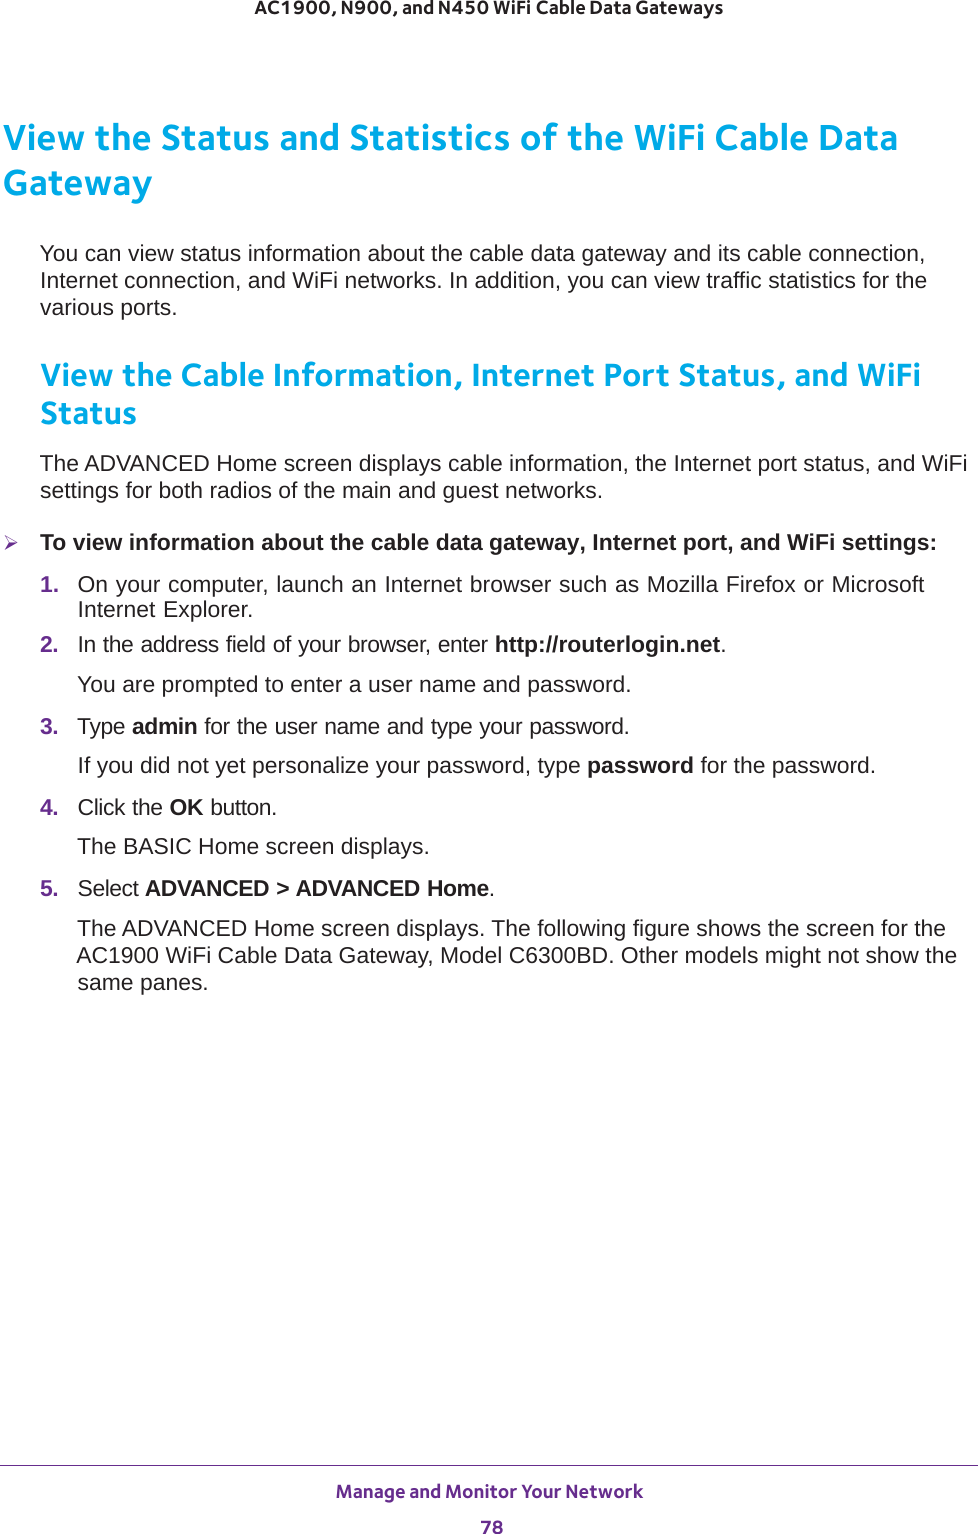 Manage and Monitor Your Network 78AC1900, N900, and N450 WiFi Cable Data Gateways View the Status and Statistics of the WiFi Cable Data GatewayYou can view status information about the cable data gateway and its cable connection, Internet connection, and WiFi networks. In addition, you can view traffic statistics for the various ports.View the Cable Information, Internet Port Status, and WiFi StatusThe ADVANCED Home screen displays cable information, the Internet port status, and WiFi settings for both radios of the main and guest networks.To view information about the cable data gateway, Internet port, and WiFi settings:1.  On your computer, launch an Internet browser such as Mozilla Firefox or Microsoft Internet Explorer. 2.  In the address field of your browser, enter http://routerlogin.net.You are prompted to enter a user name and password.3.  Type admin for the user name and type your password.If you did not yet personalize your password, type password for the password.4.  Click the OK button. The BASIC Home screen displays.5.  Select ADVANCED &gt; ADVANCED Home. The ADVANCED Home screen displays. The following figure shows the screen for the AC1900 WiFi Cable Data Gateway, Model C6300BD. Other models might not show the same panes.